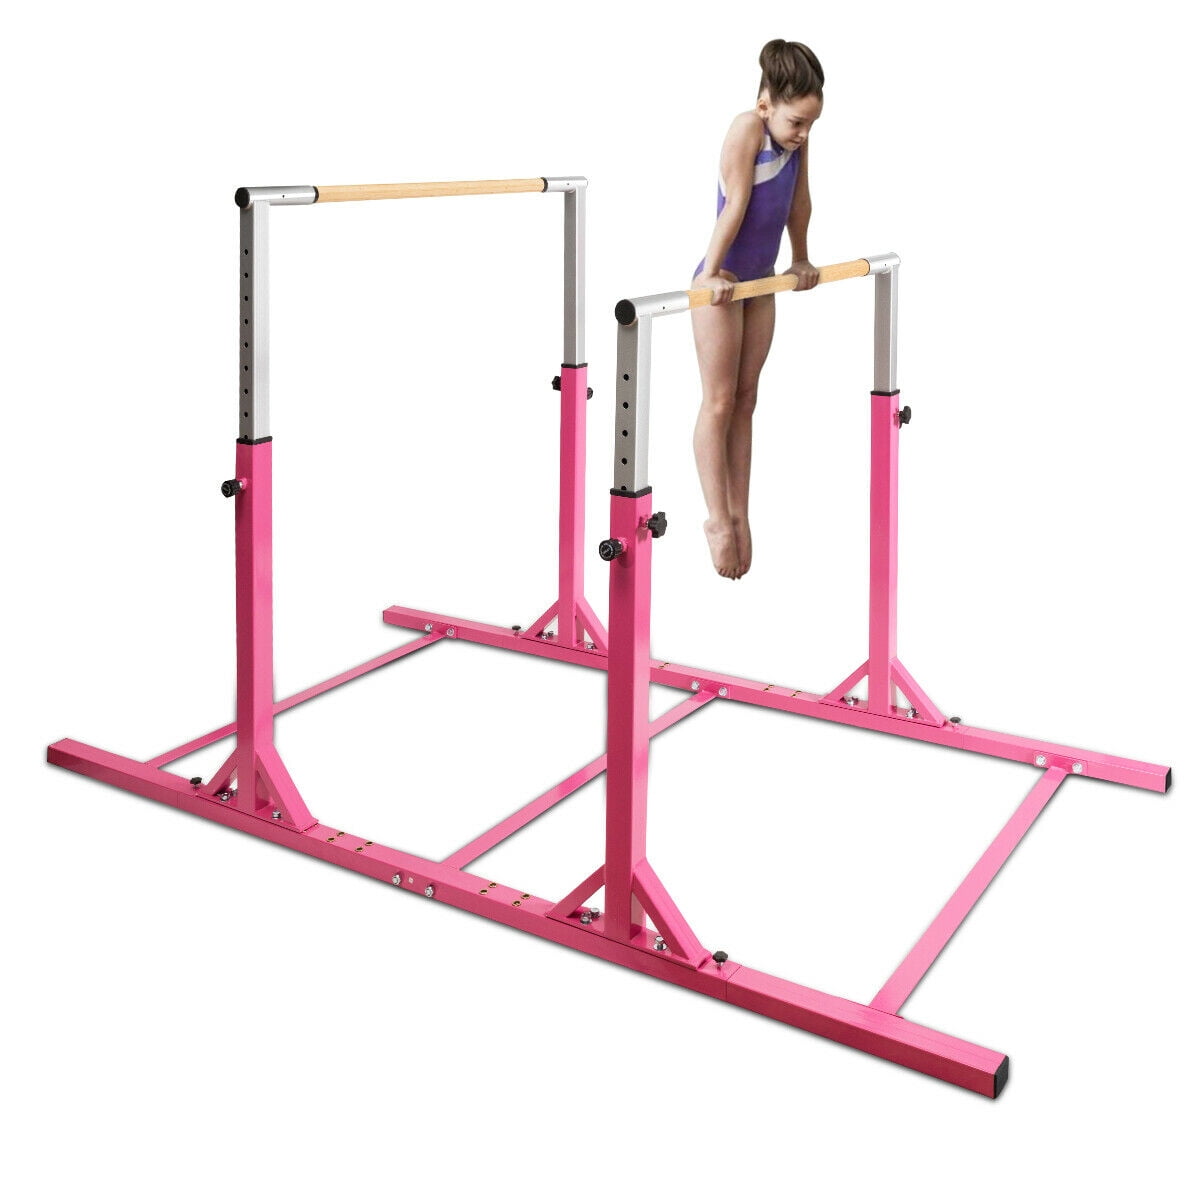 COSTWAY Parallel Gymnastics Bar, Double Horizontal Bars with